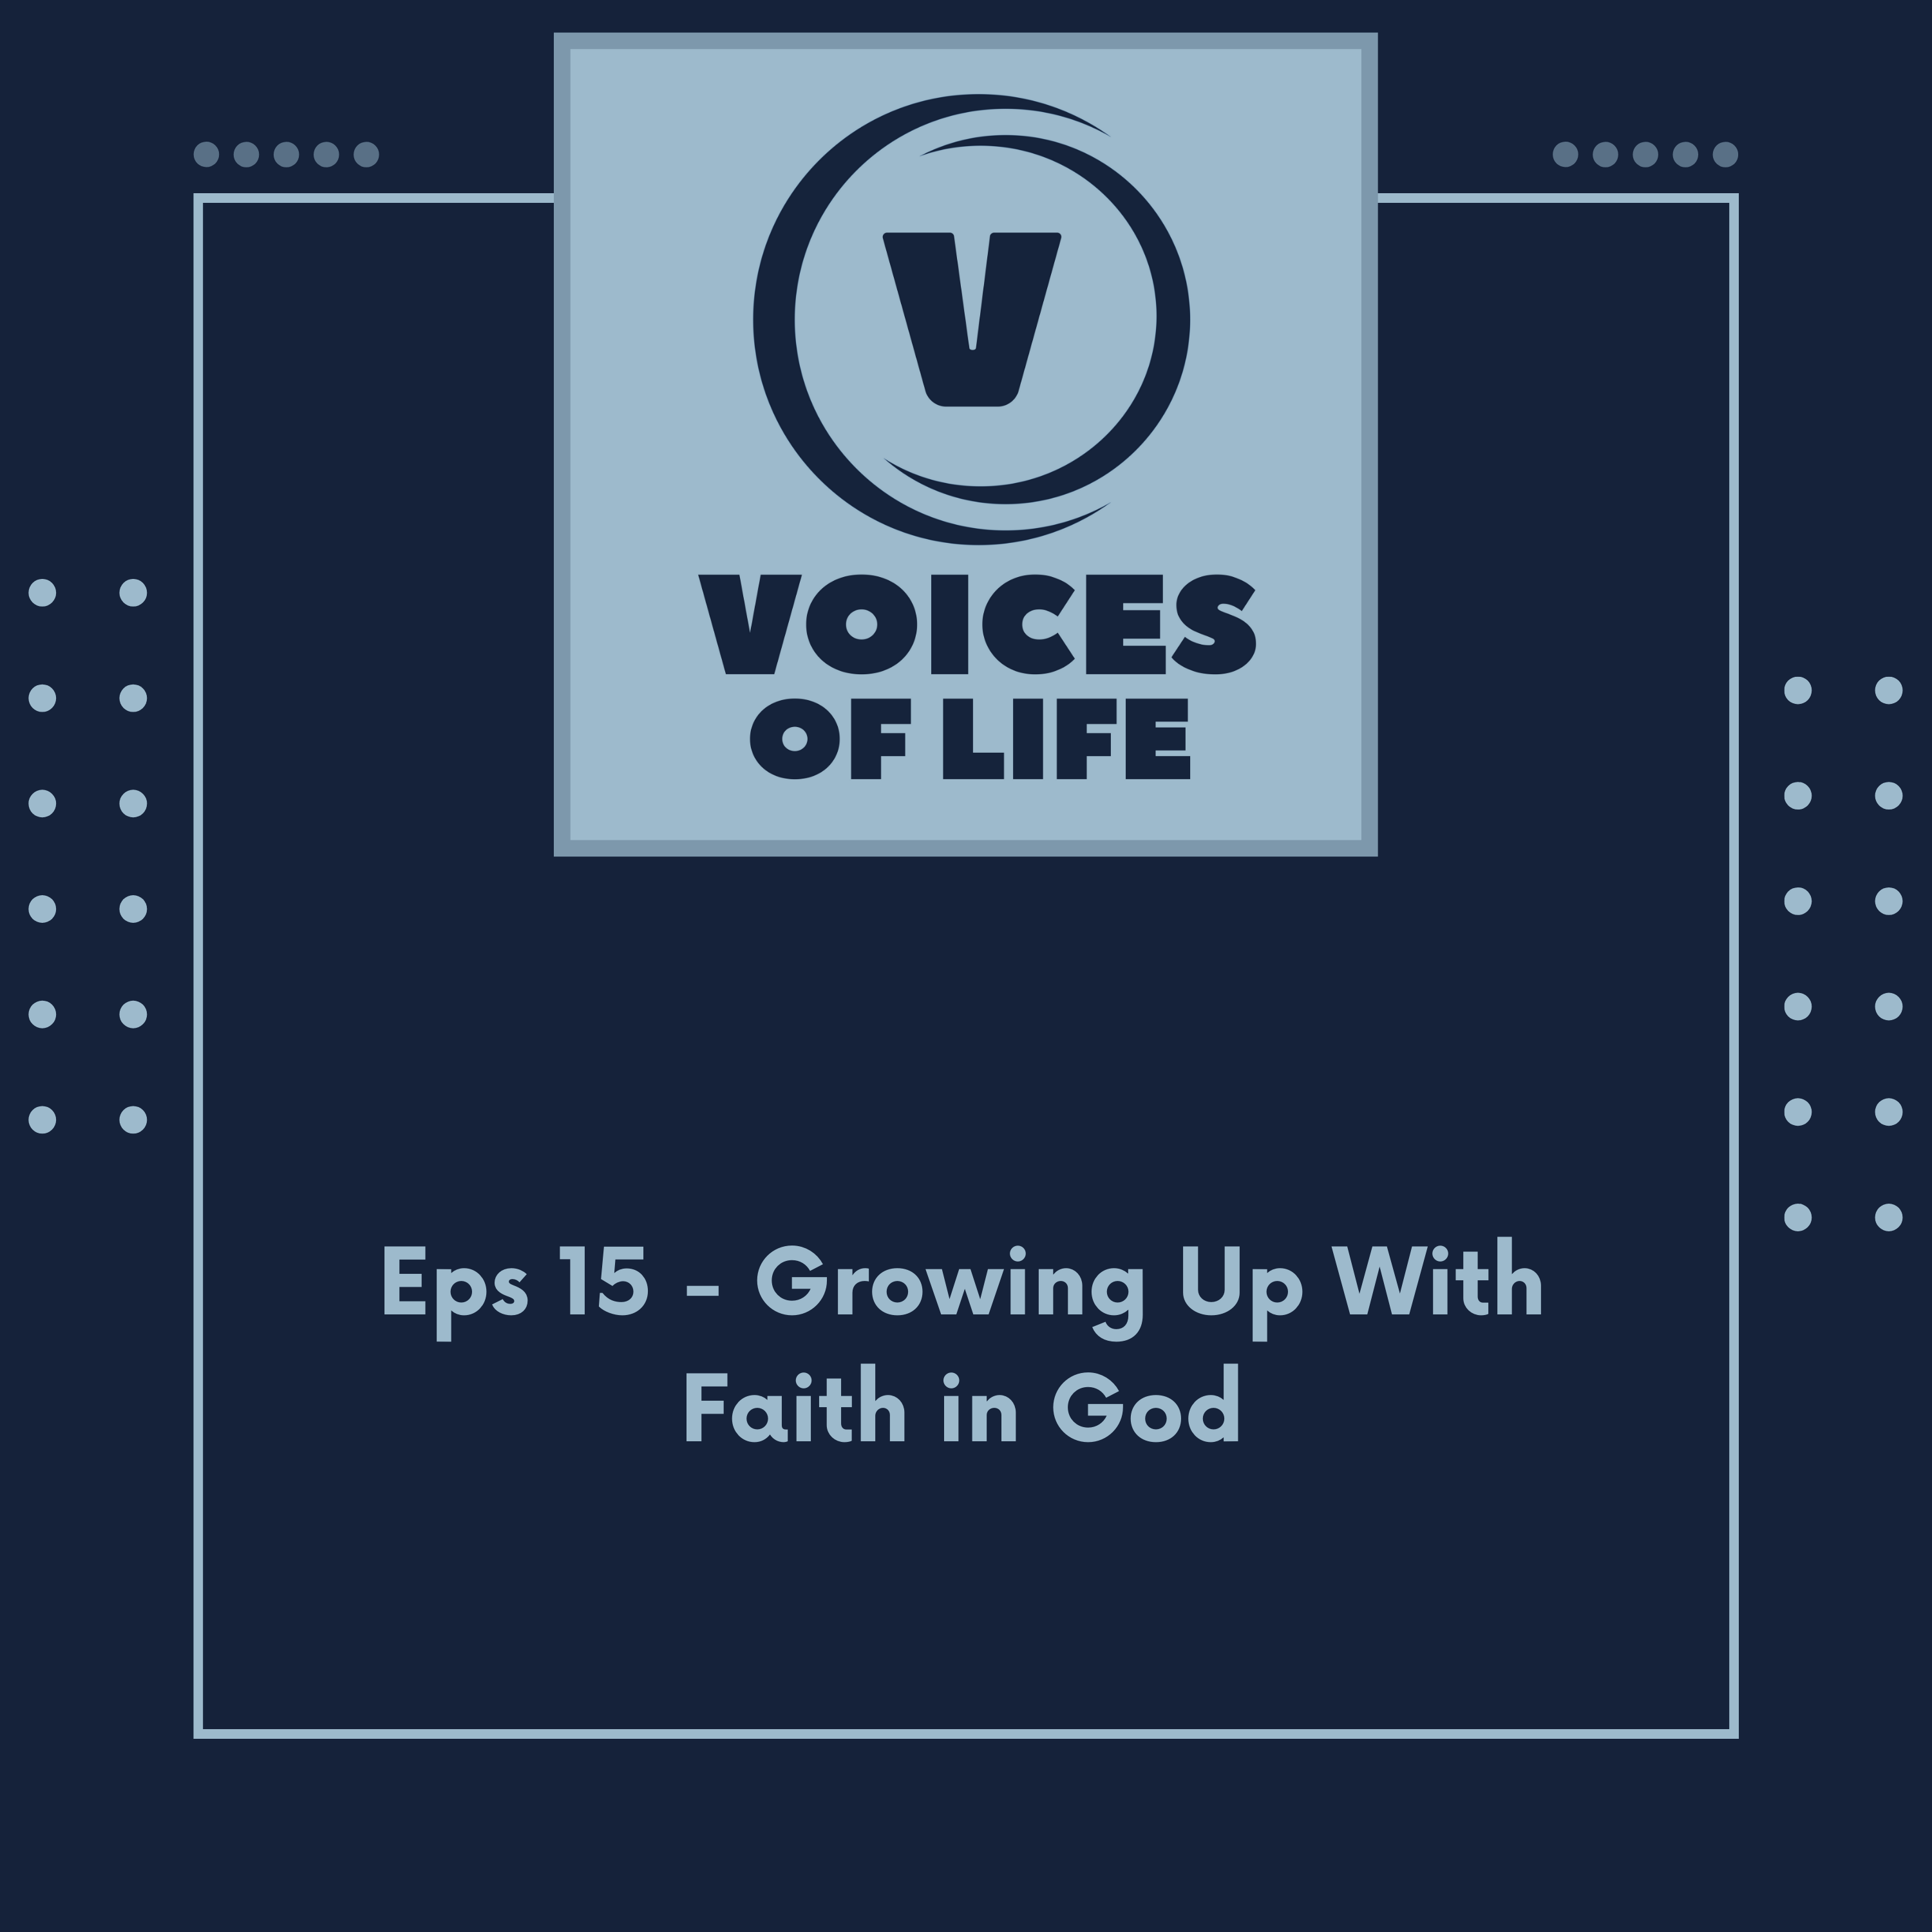 Growing Up With Faith in God